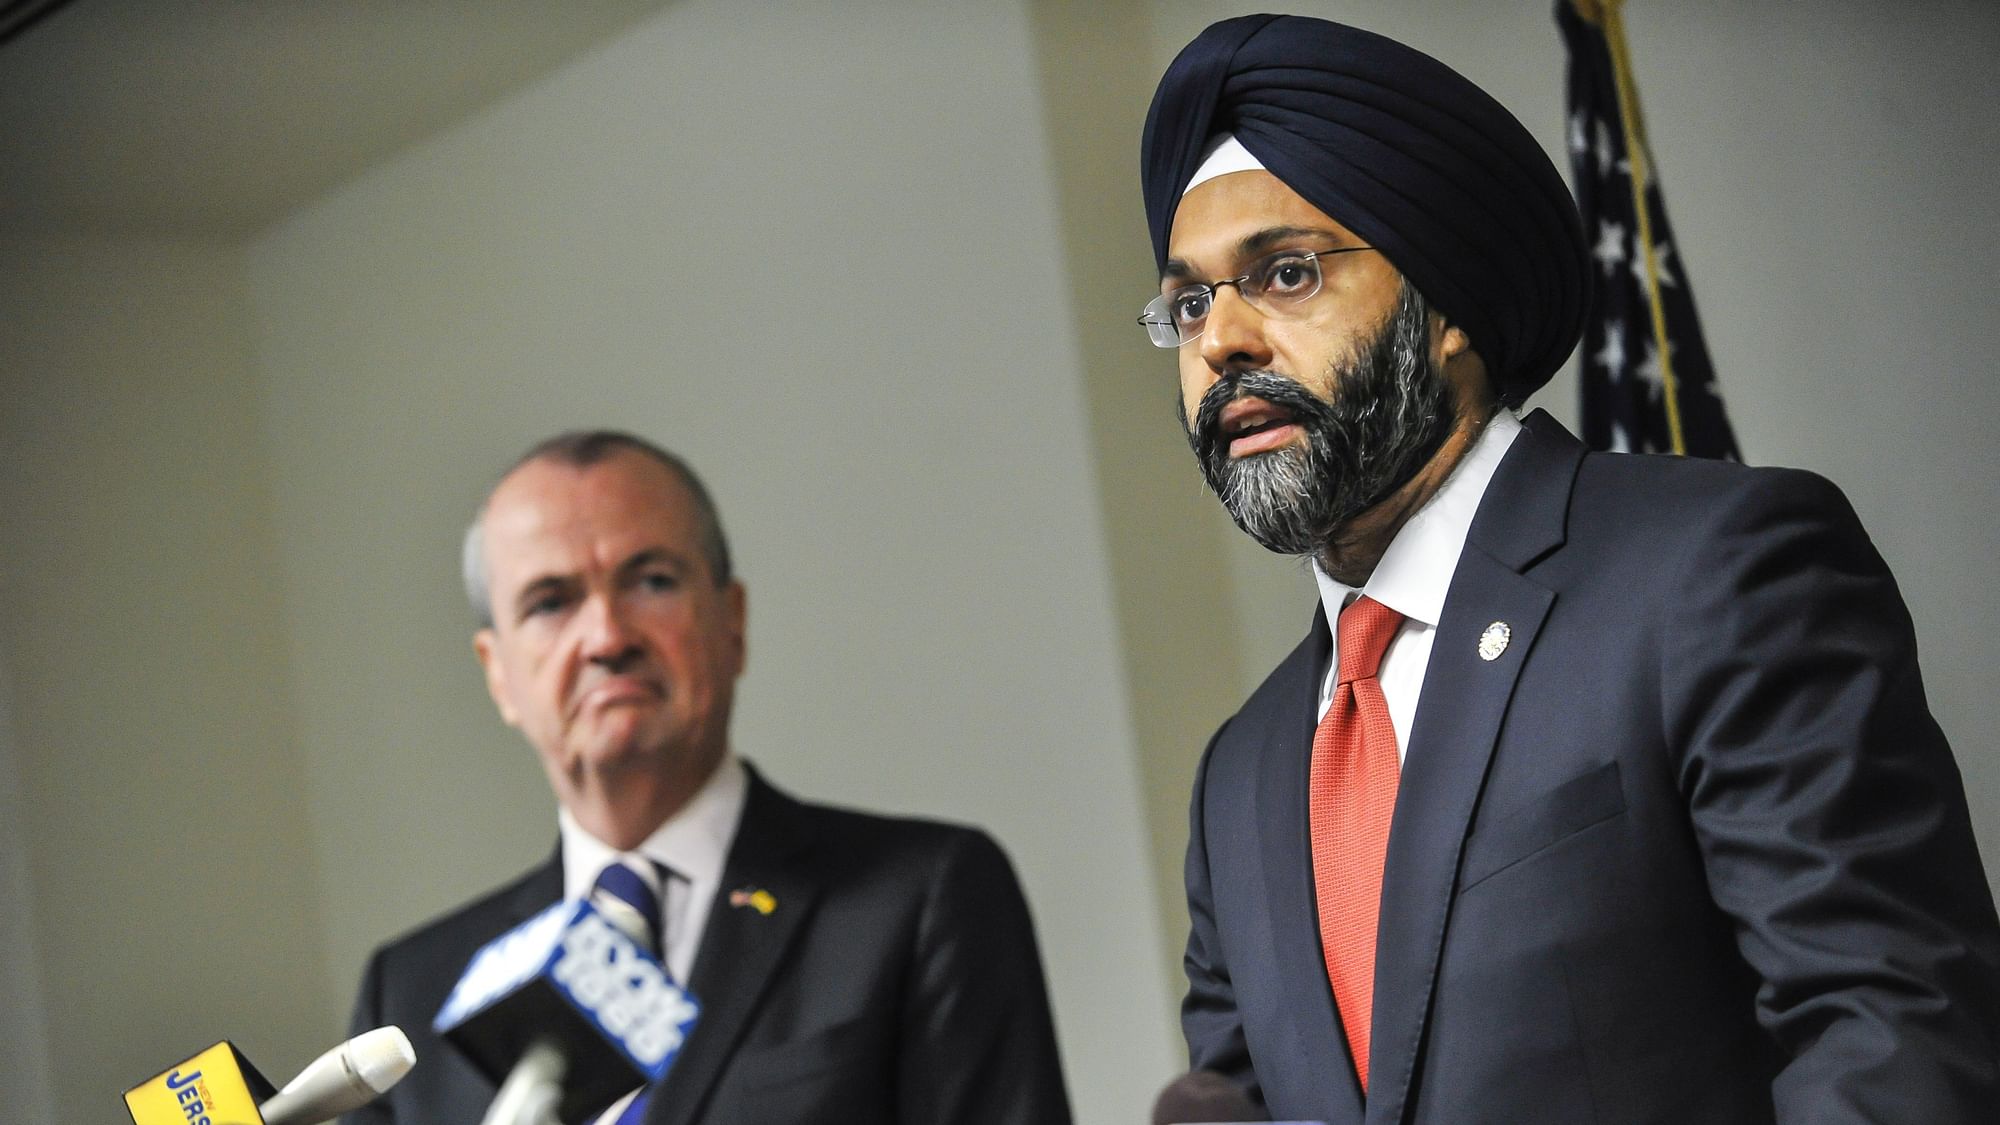 Bergen County Prosecutor Gurbir Grewal addresses the press after Governor-elect Phil Murphy nominated him for attorney general on Tuesday, 12 December.